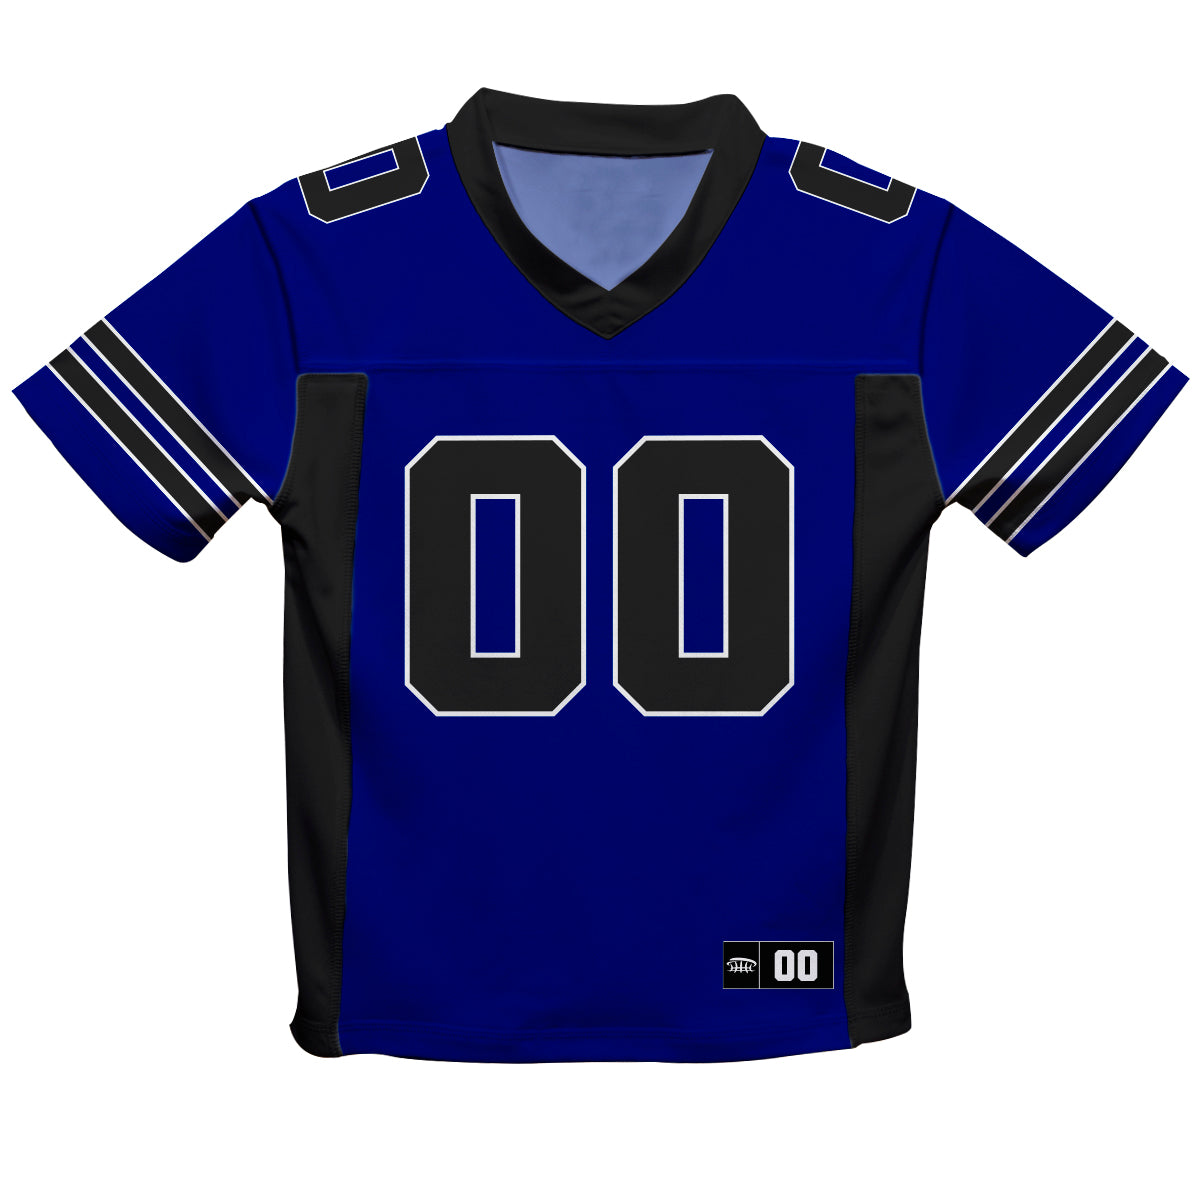 Personalized Name and Number Blue and Black Fashion Football T